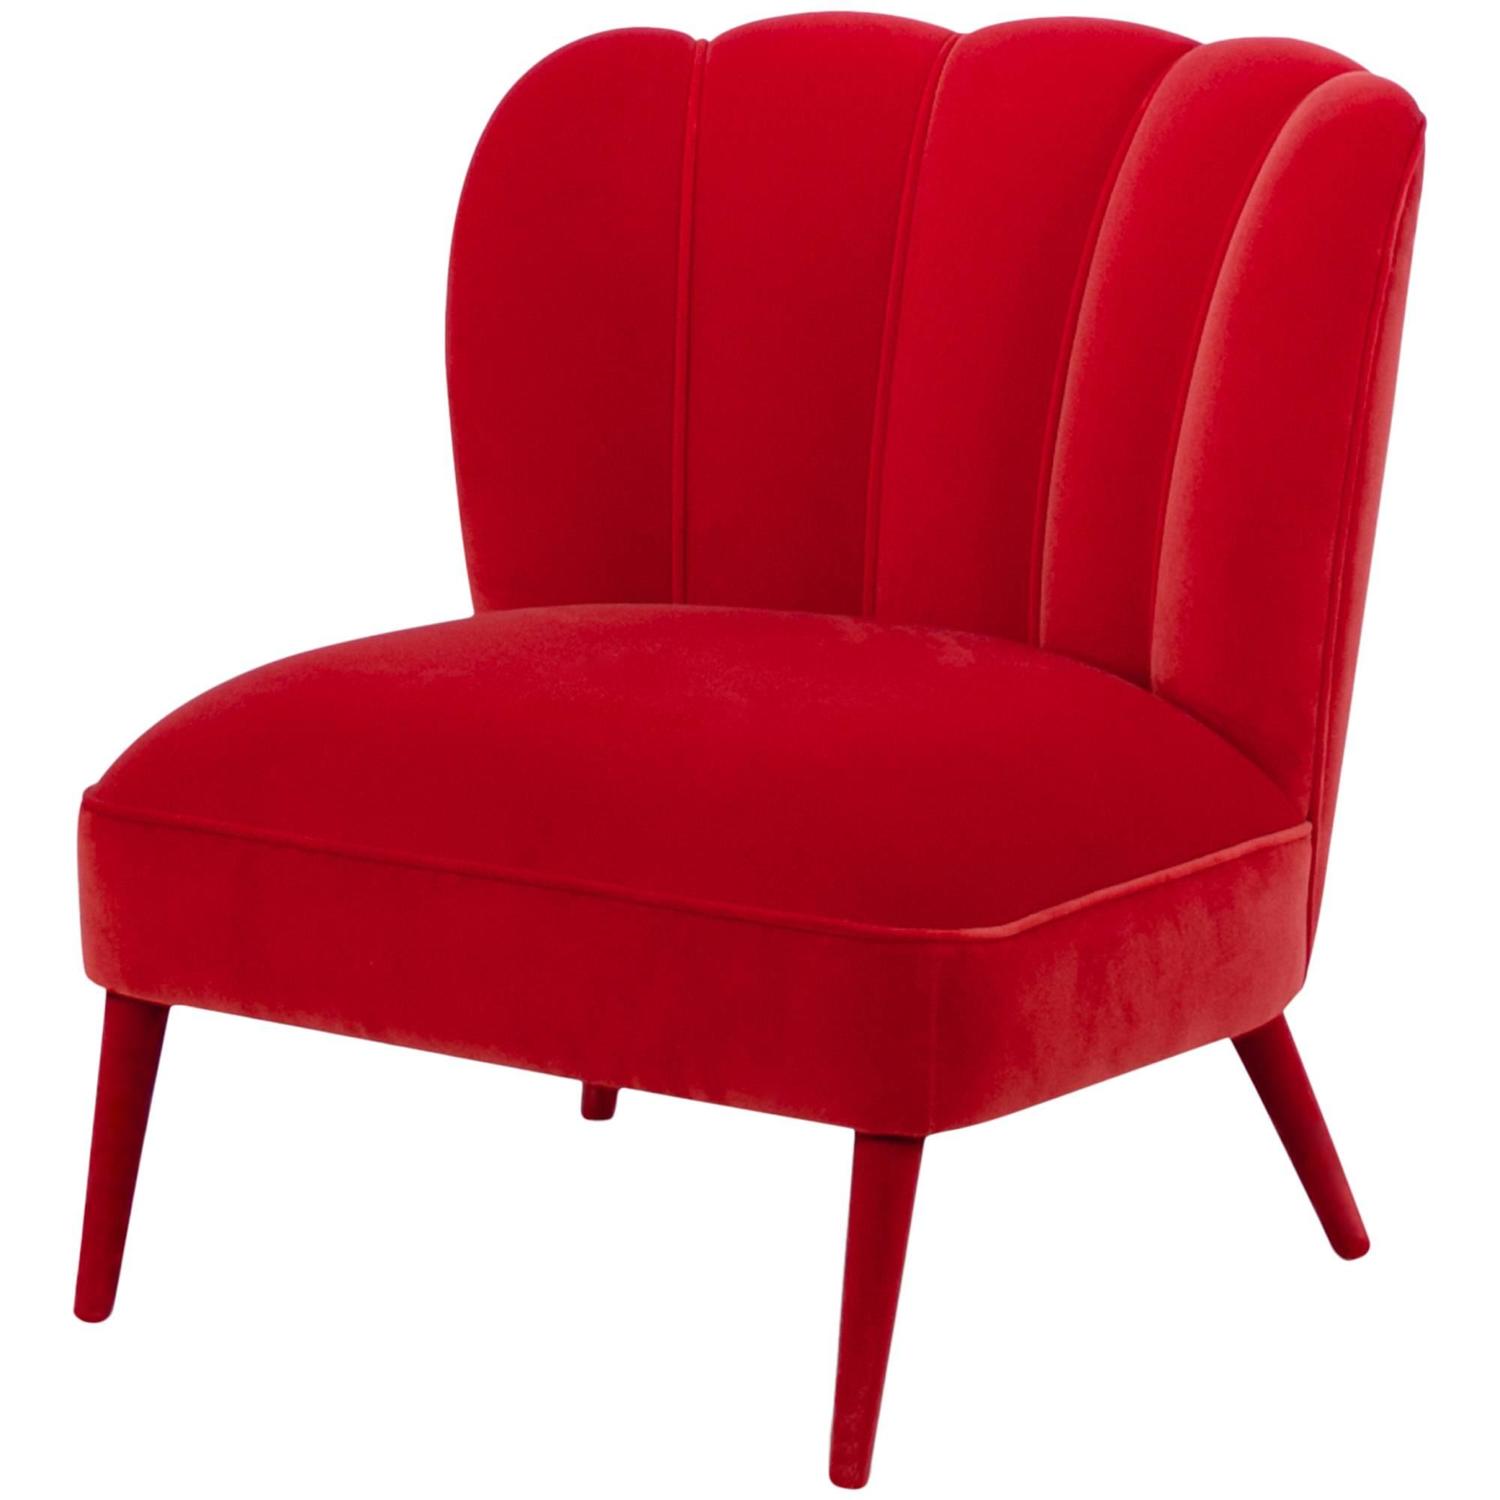 Red Dragon Armchair in Red Velvet For Sale at 1stdibs